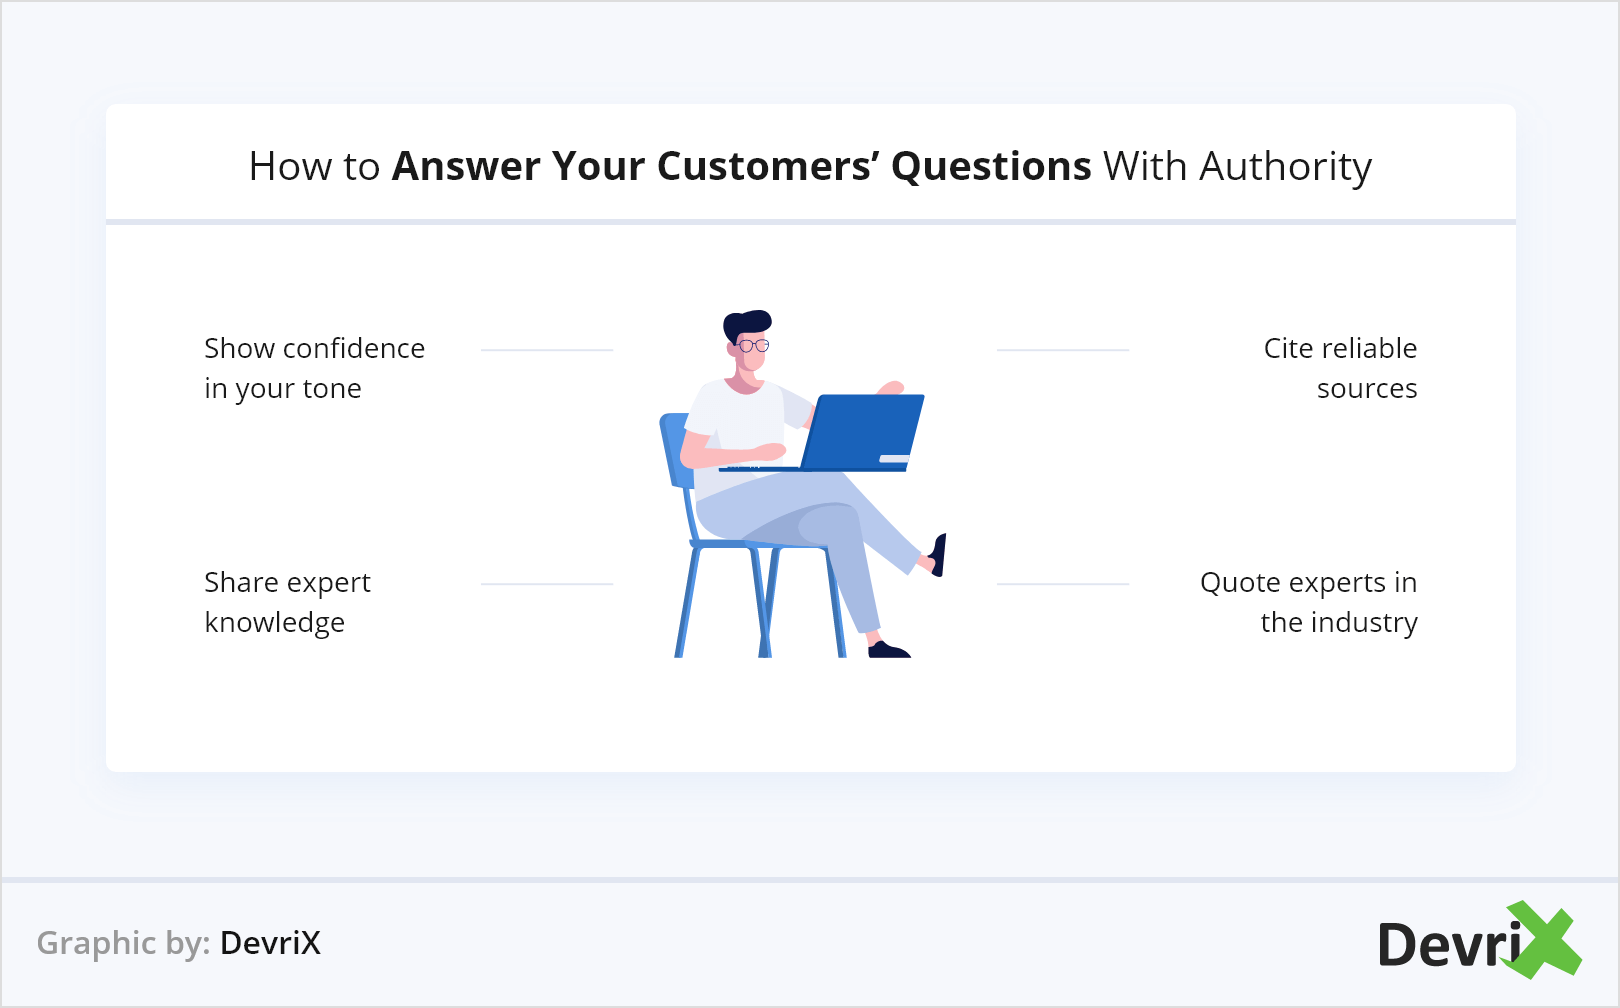 How to Answer Your Customers’ Questions With Authority@2x